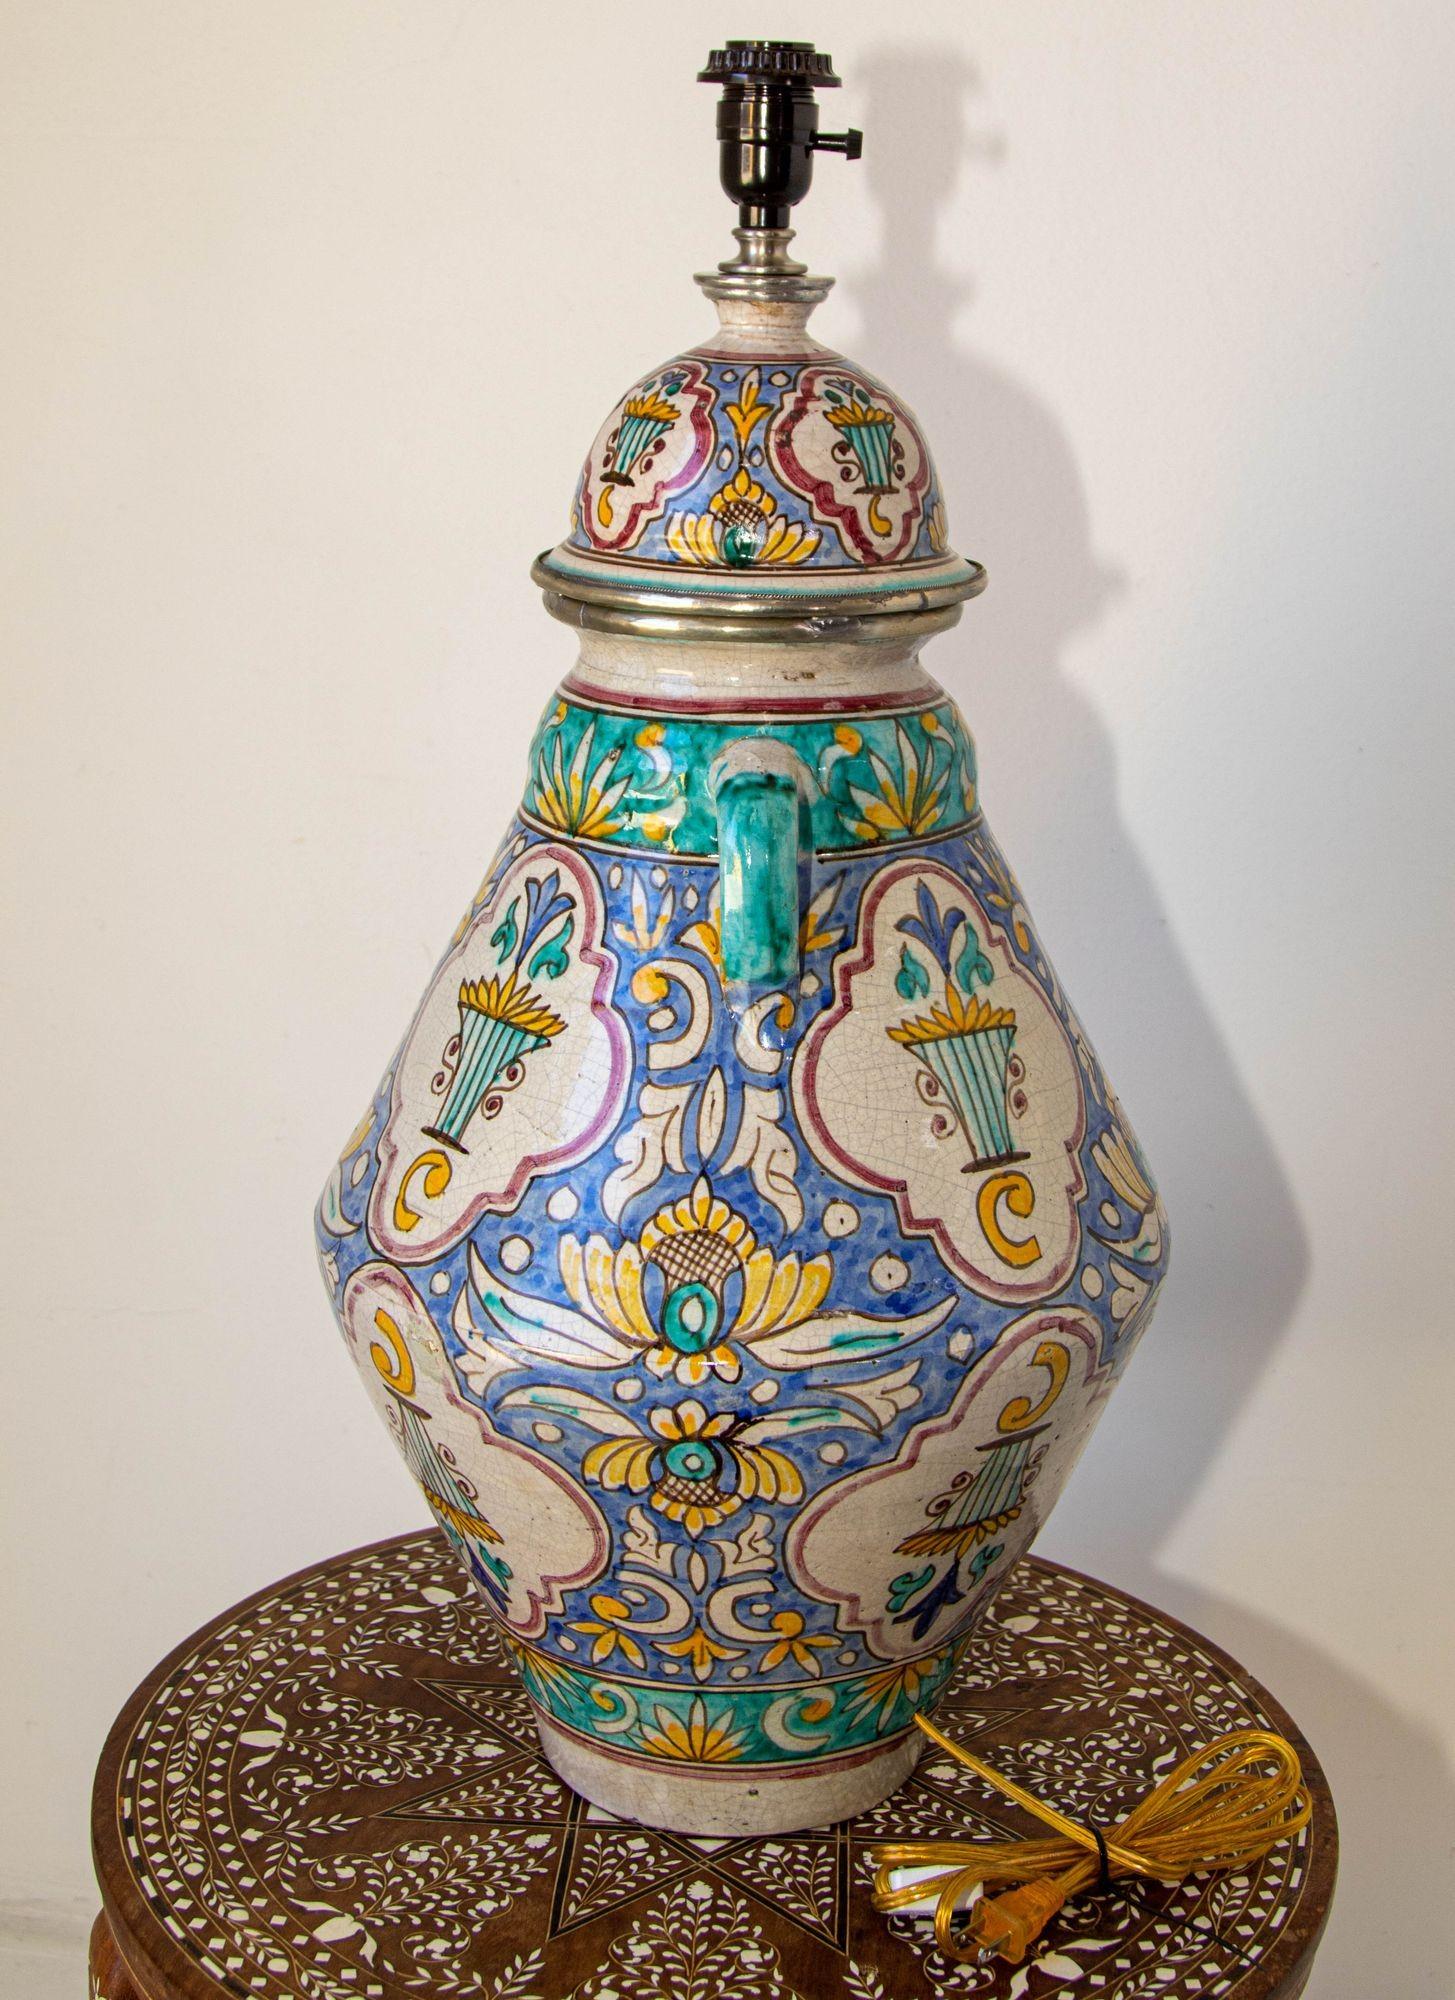 Large antique Moroccan glazed ceramic urn with lid from Fez turned into a lamp.
Large Moroccan Ceramic Table Lamp with Moorish Spanish Granada Design
Granada style ceramic handcrafted and hand-painted with Moorish foliate designs in blue, teal,